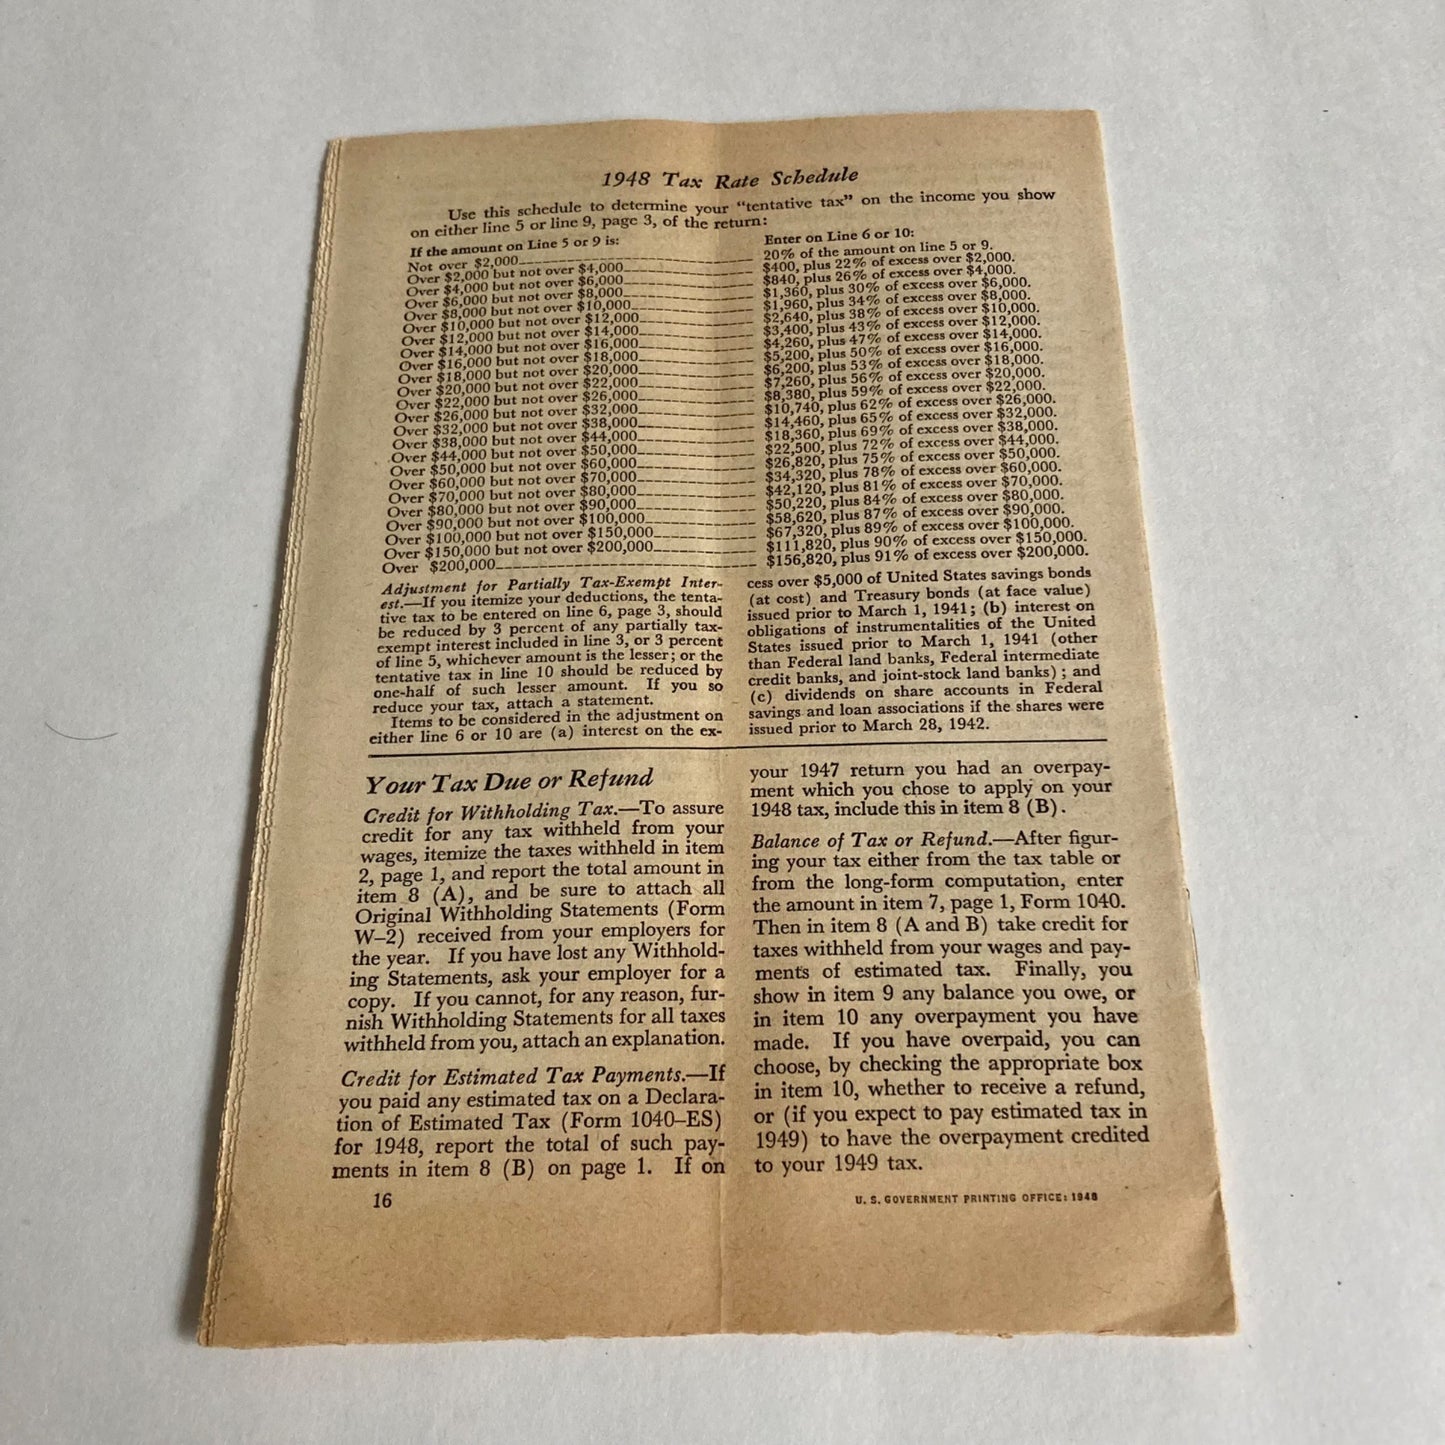 Vintage 1948 IRS Forms 1040 Schedule D, How To Prepare Your US Income Tax Return